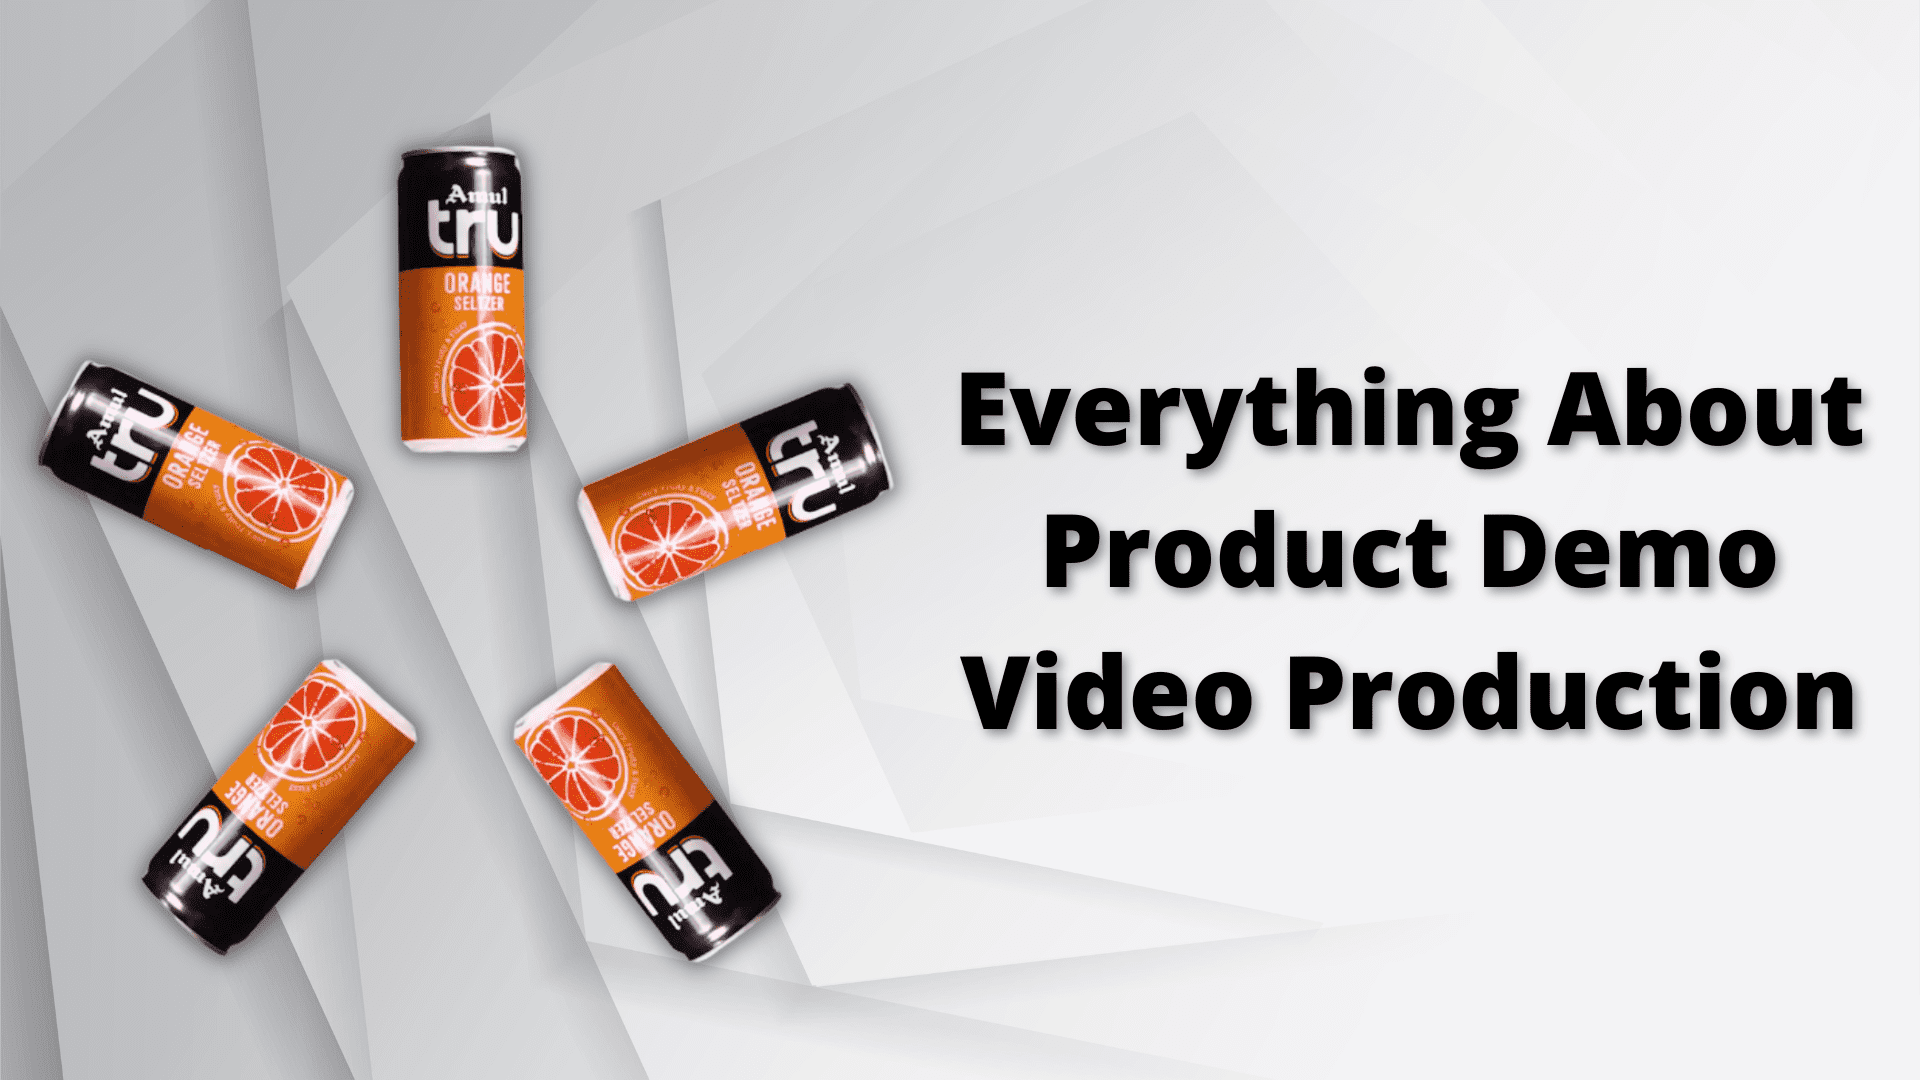 How To Promote a Video Production Company 1920 × 1080 px 1